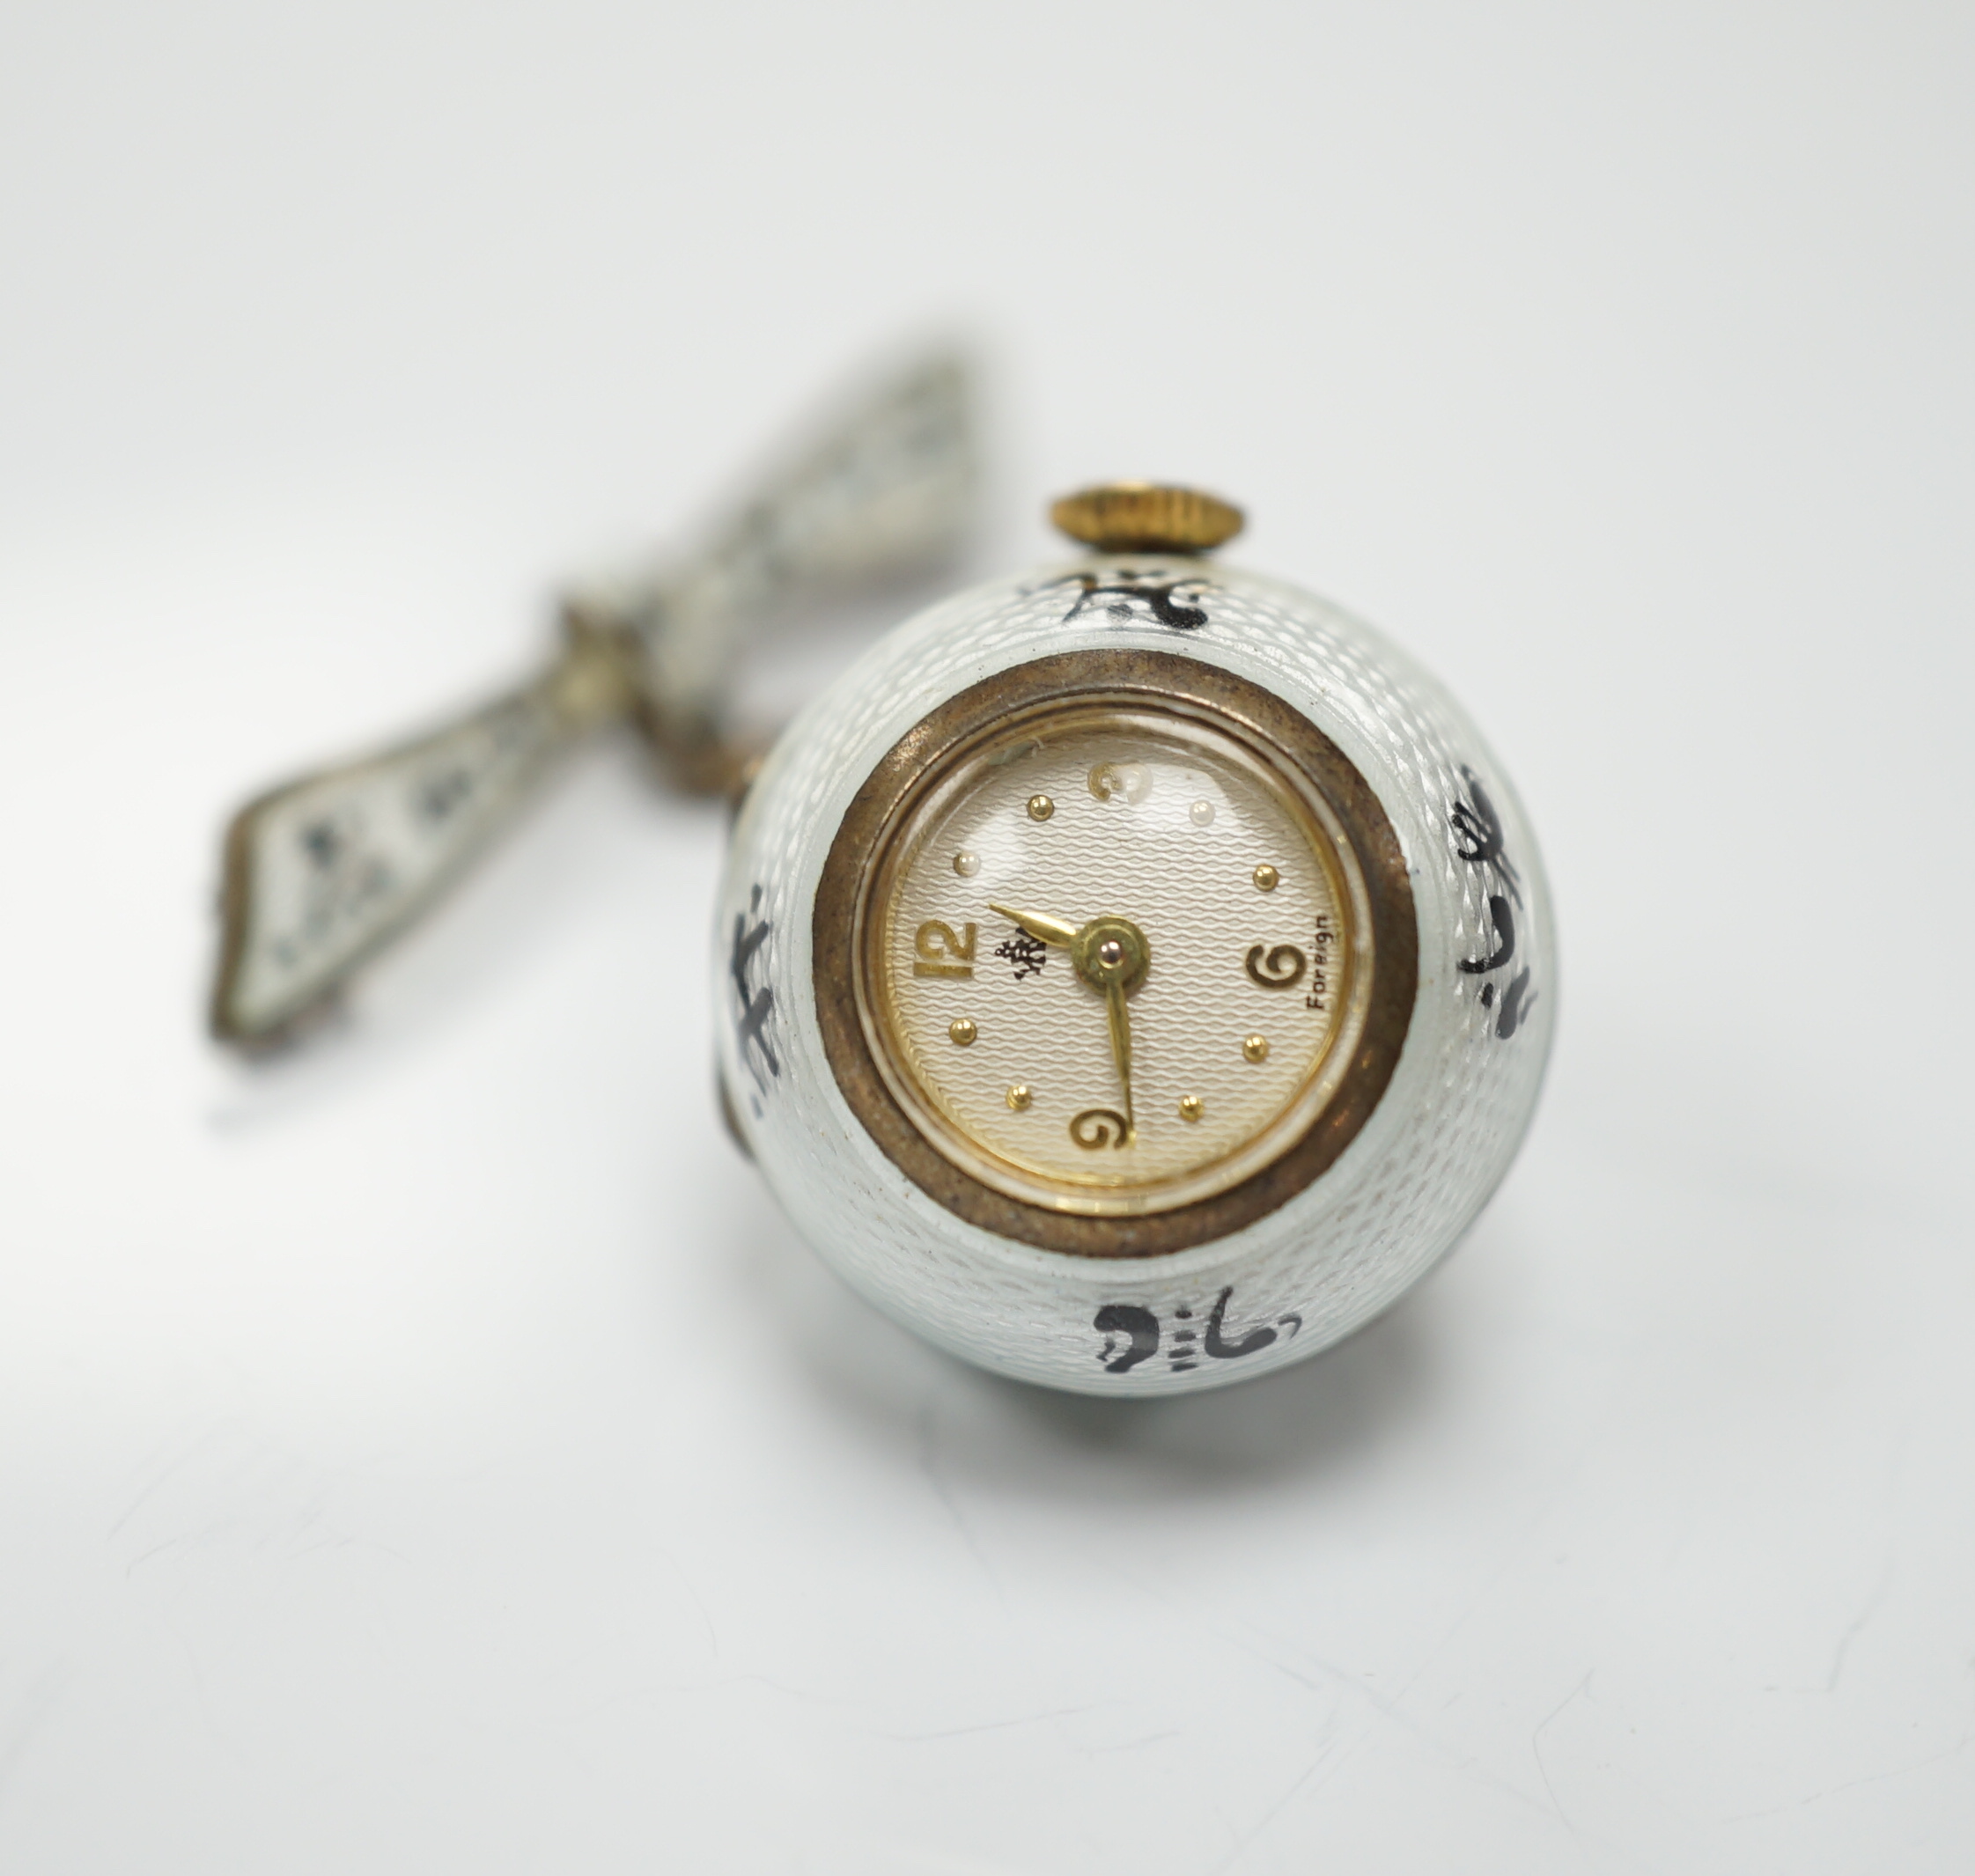 An early to mid 20th century silver and two colour enamel globe pendant watch, on suspension chain with brooch attachment, diameter 20mm.